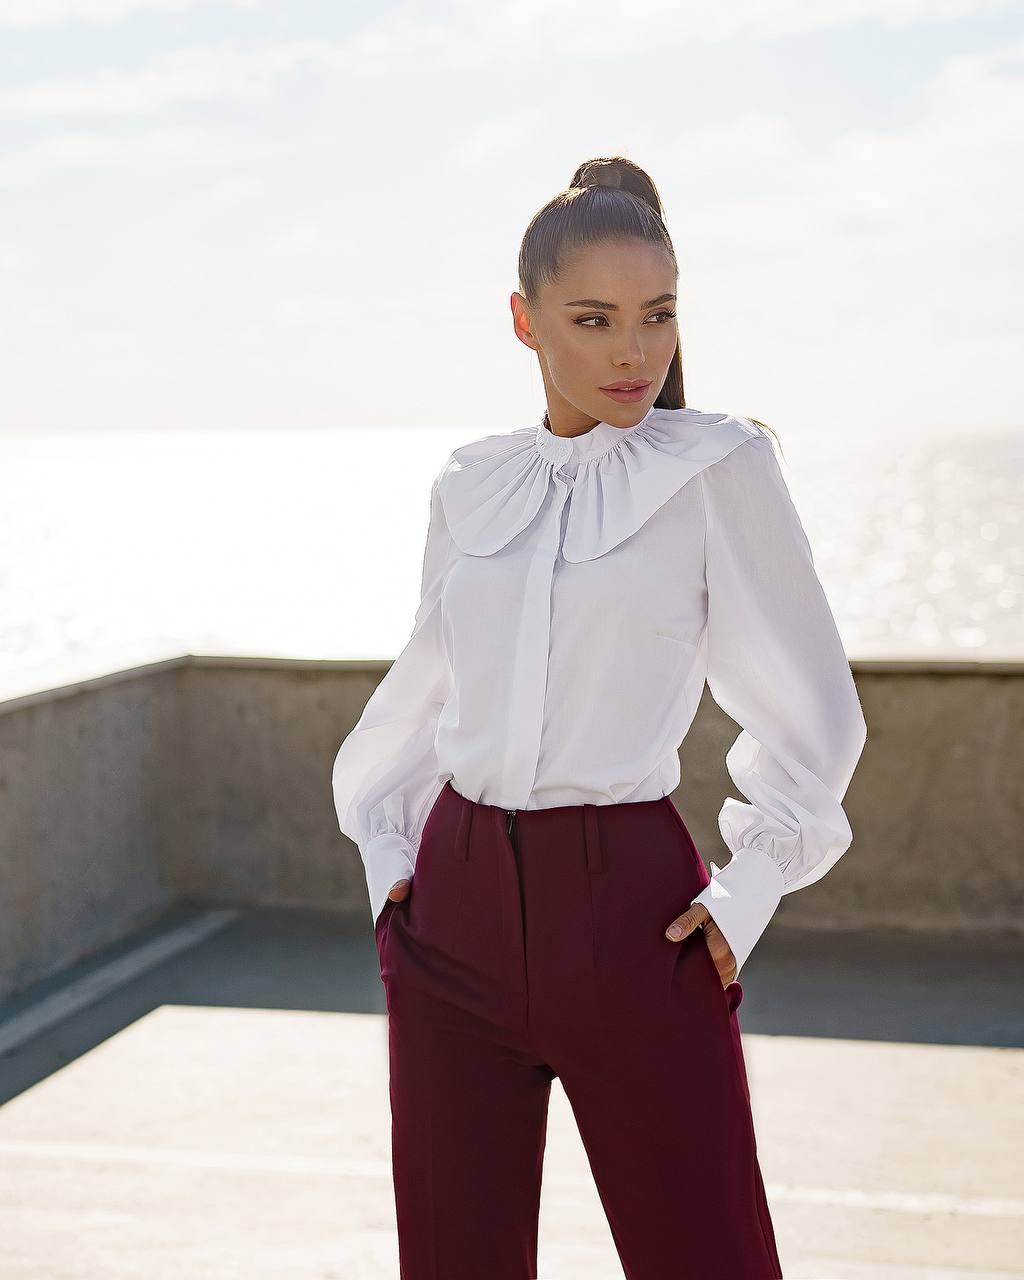 a woman wearing a white shirt and maroon pants